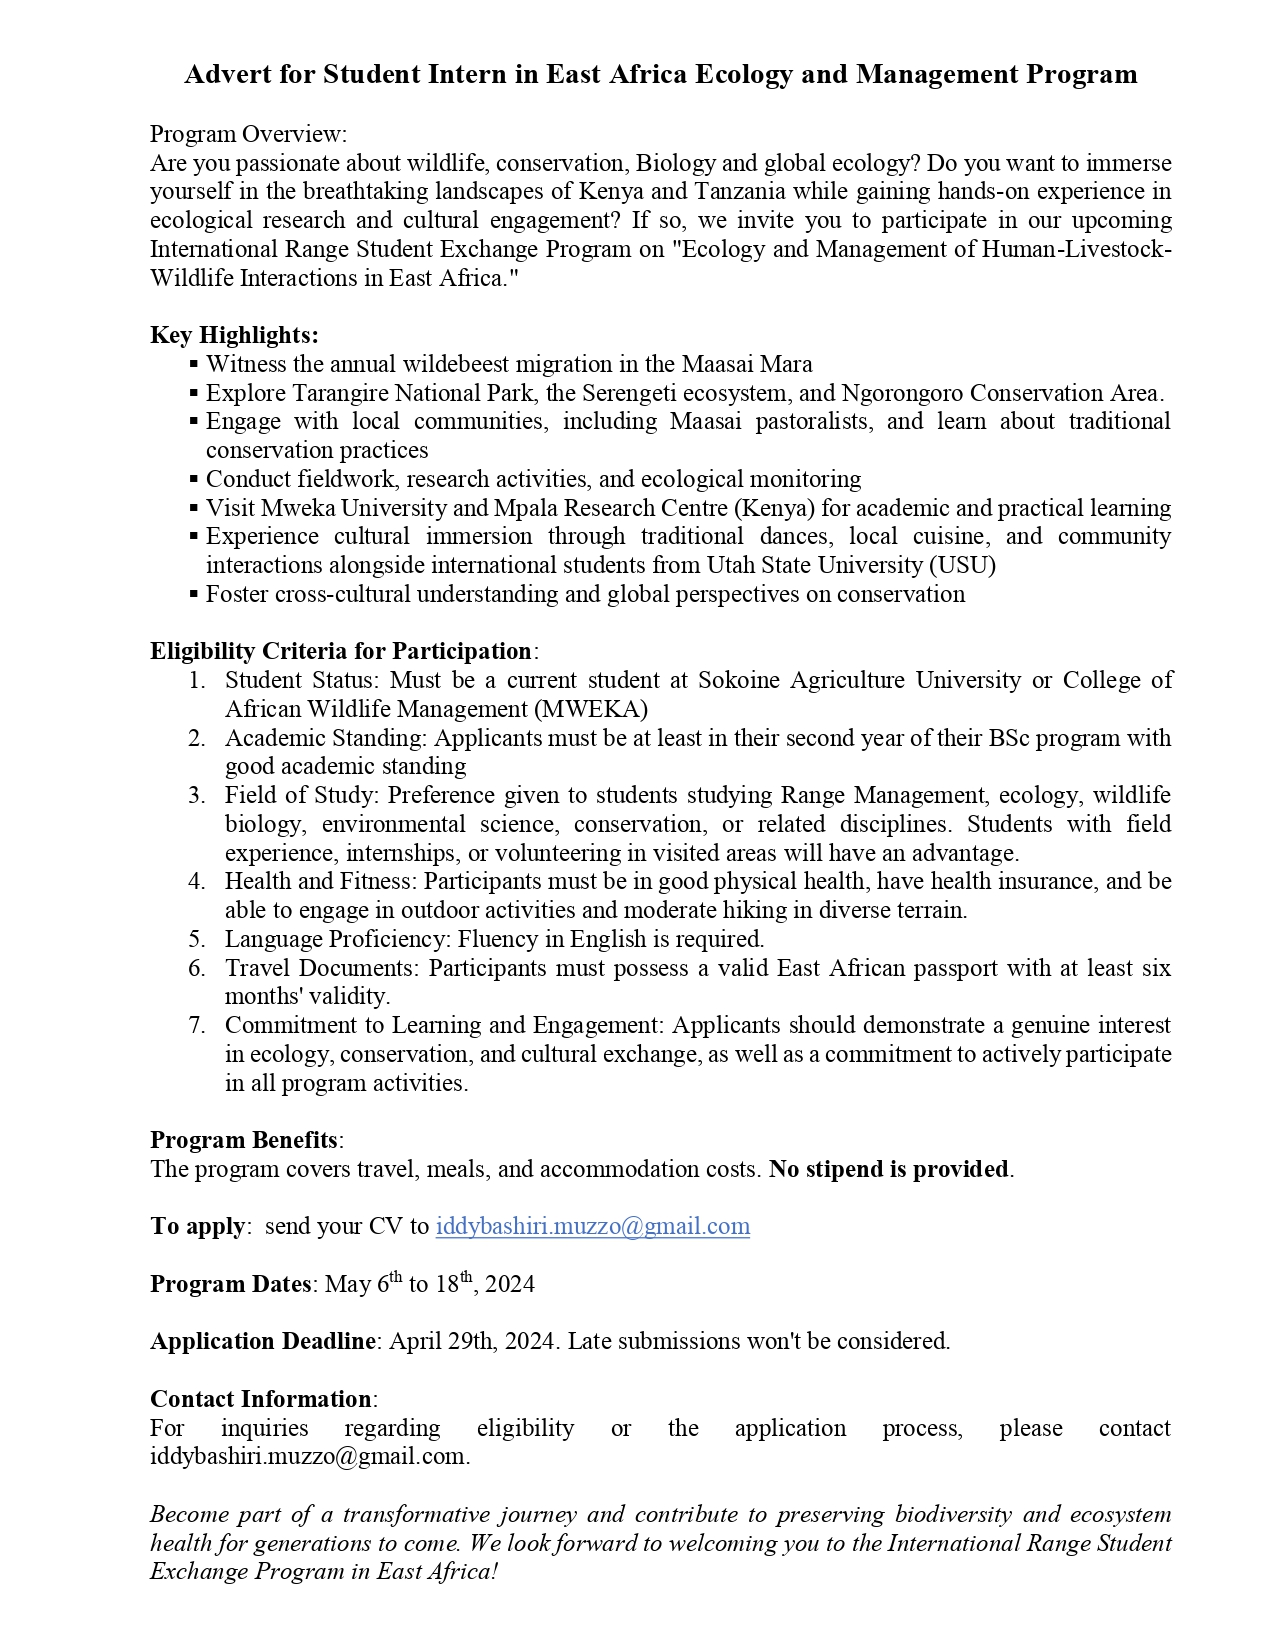 Advert for Student Intern in East Africa Ecology and Management Program